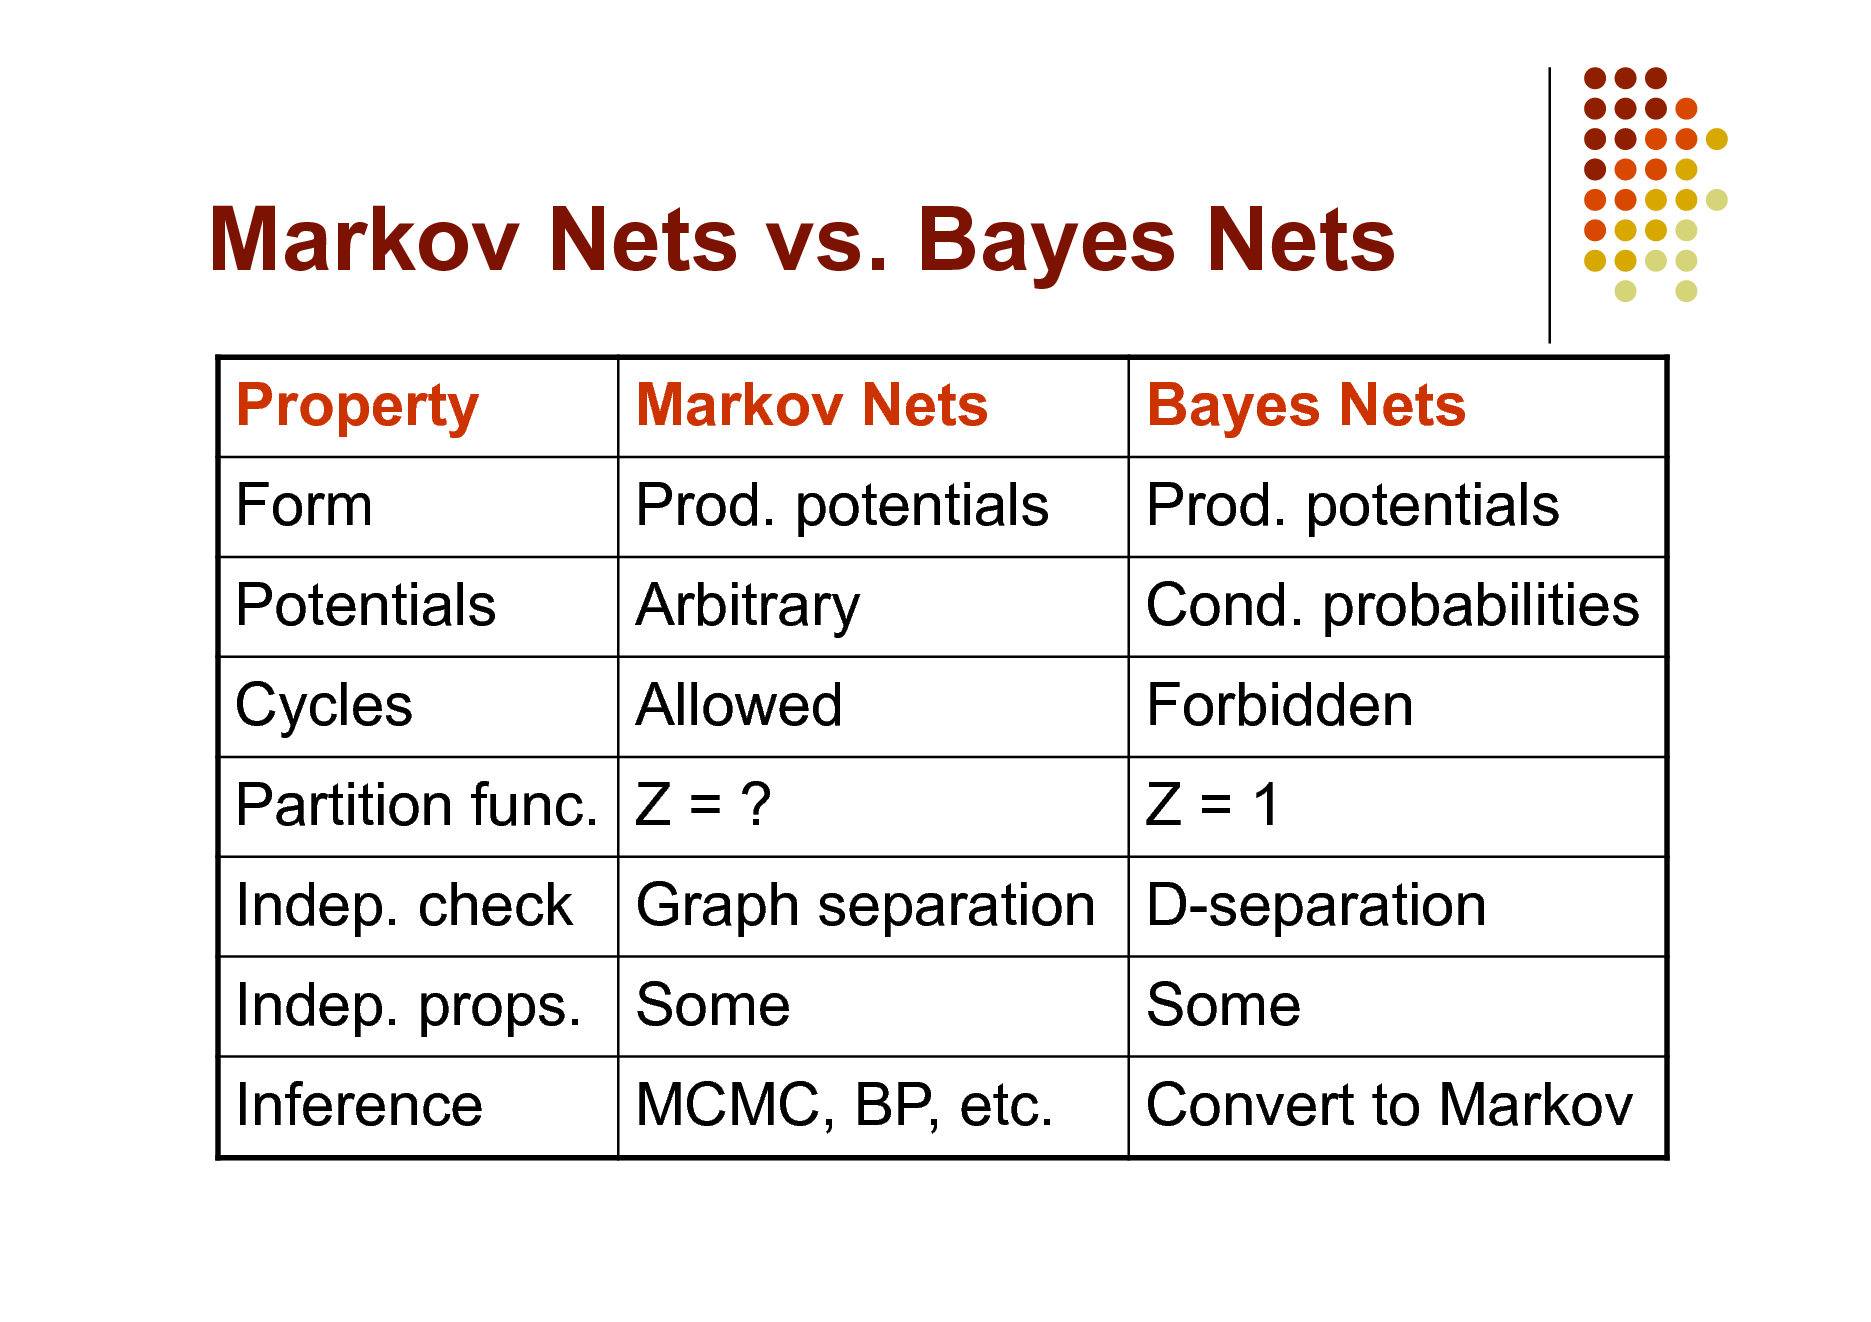 Slide: Markov Nets vs. Bayes Nets
Property Form Potentials Cycles Indep. check Inference Markov Nets Prod. potentials Arbitrary Allowed Bayes Nets Prod. potentials Cond. probabilities Forbidden Z=1 Some Convert to Markov

Partition func. Z = ? Indep. props. Some MCMC, BP, etc.

Graph separation D-separation

